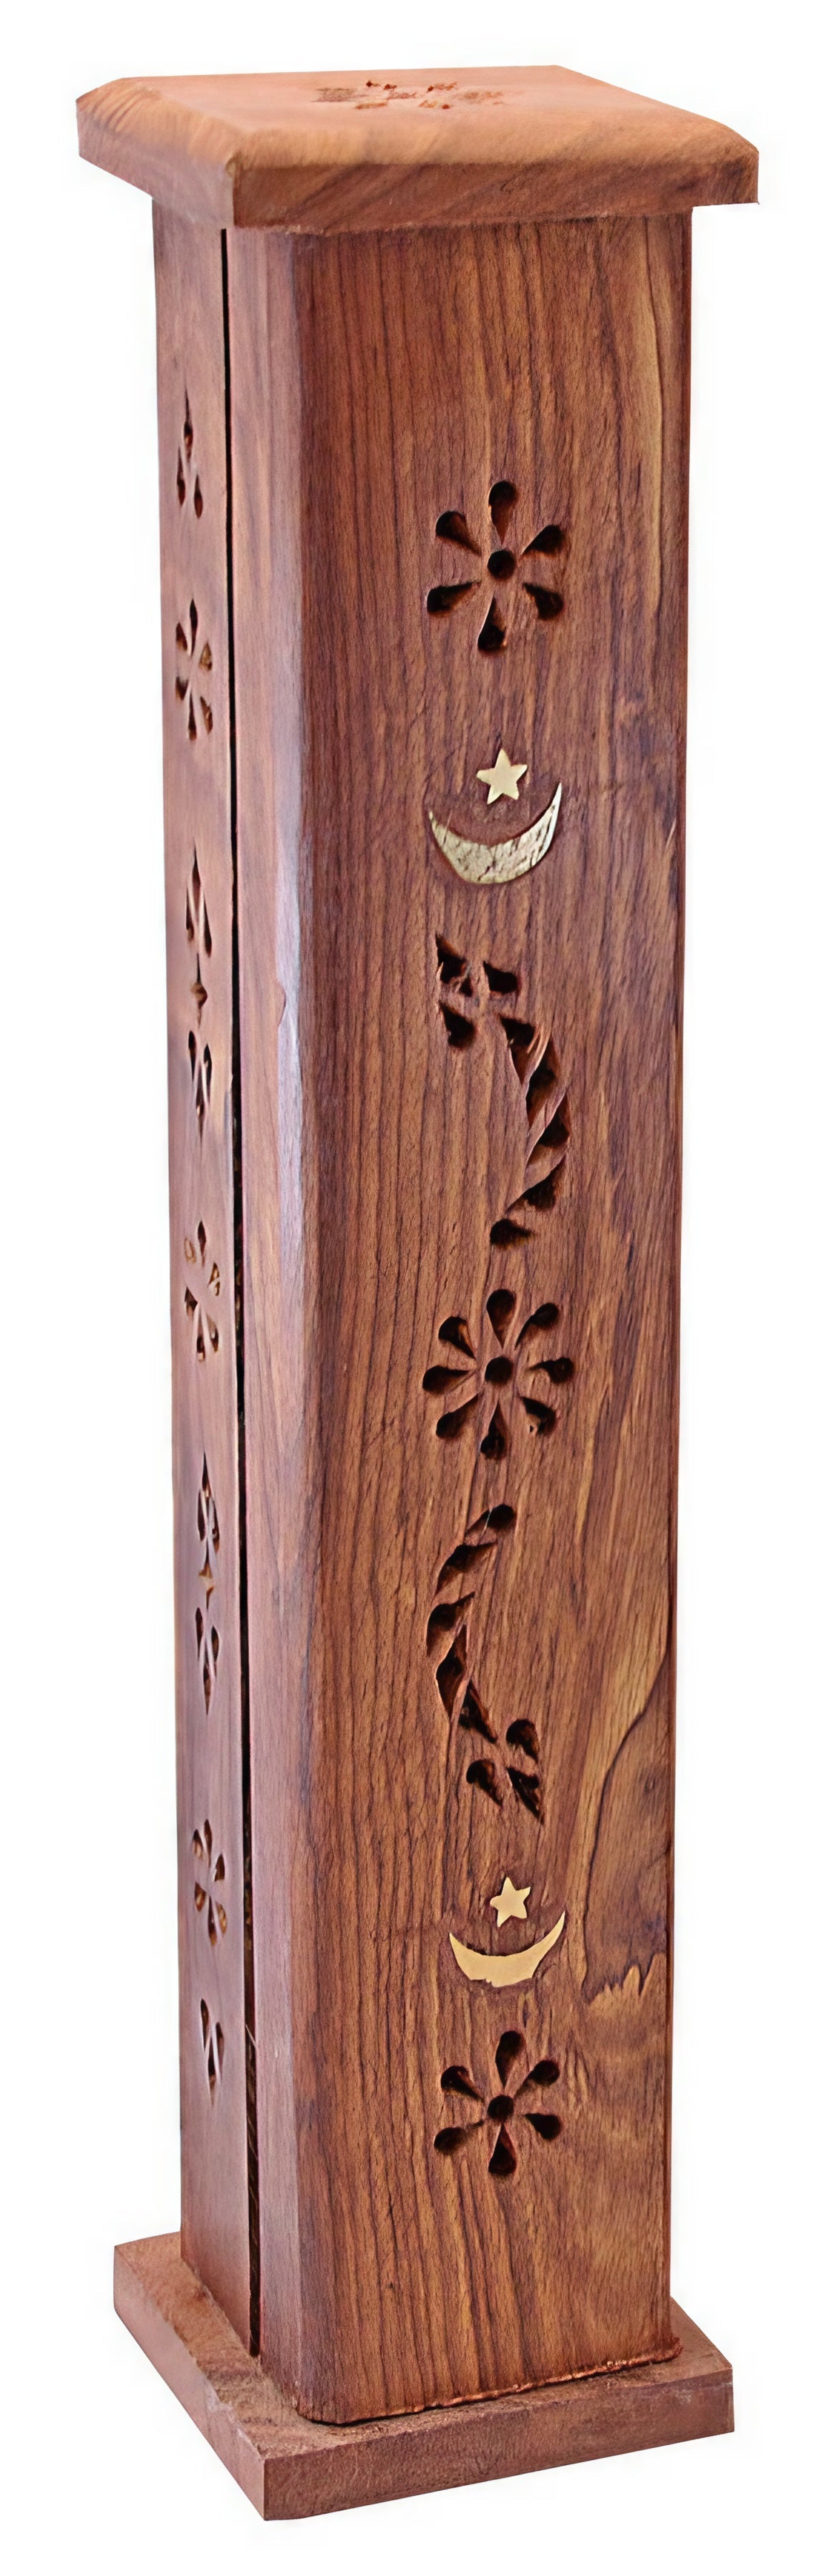 12" Moon & Star Wood Tower Incense Burner with intricate cutouts, front view on white background